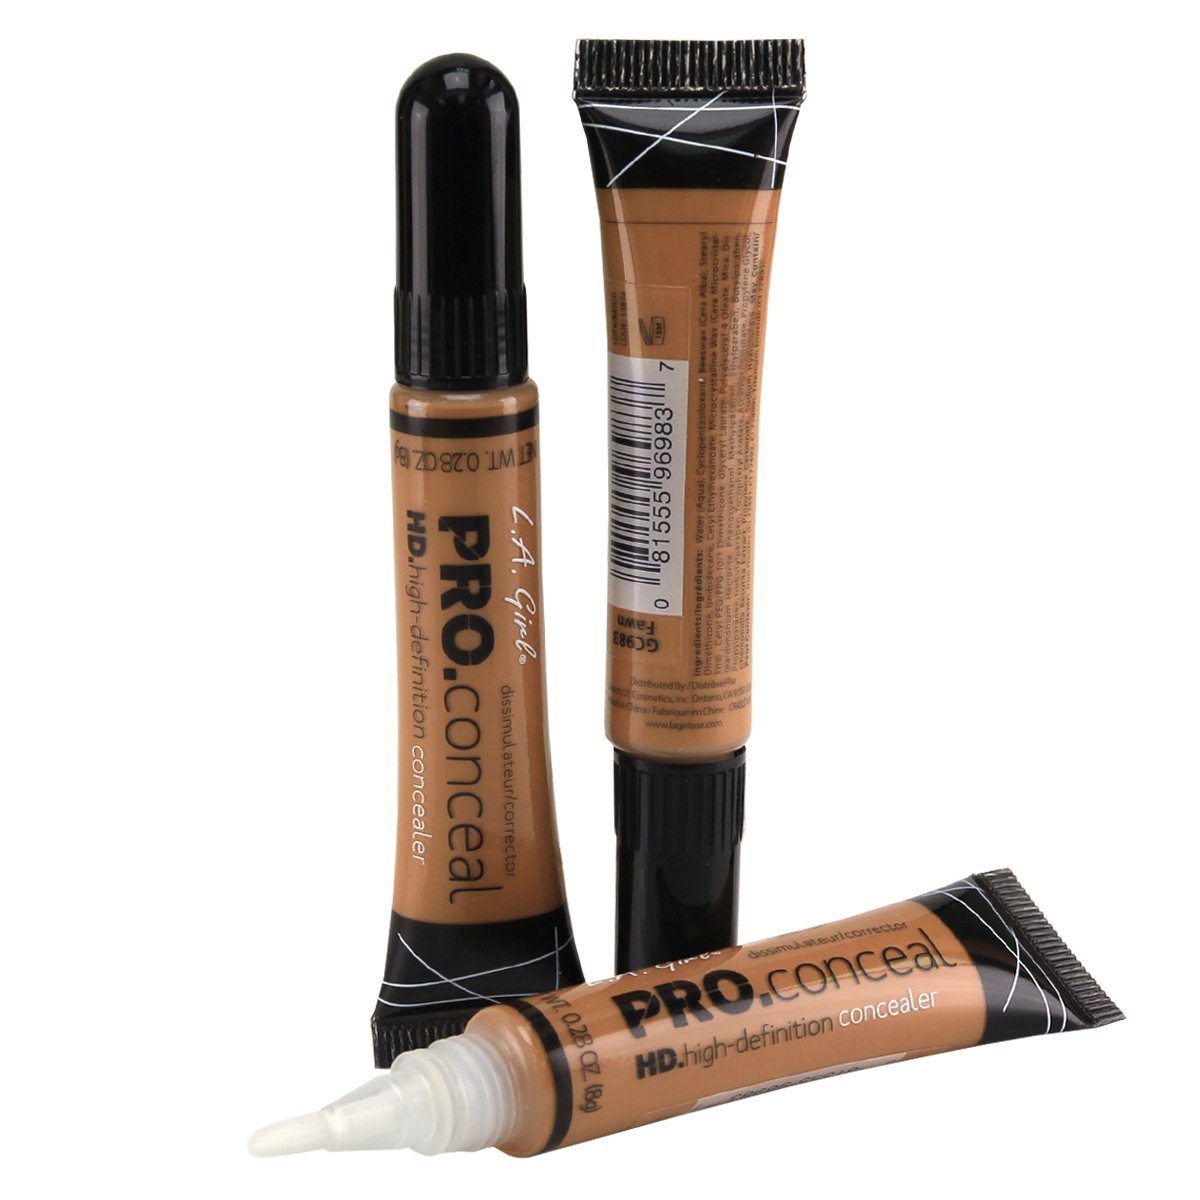 L.A. Girl Pro Concealer 3 x GC983 Fawn HD